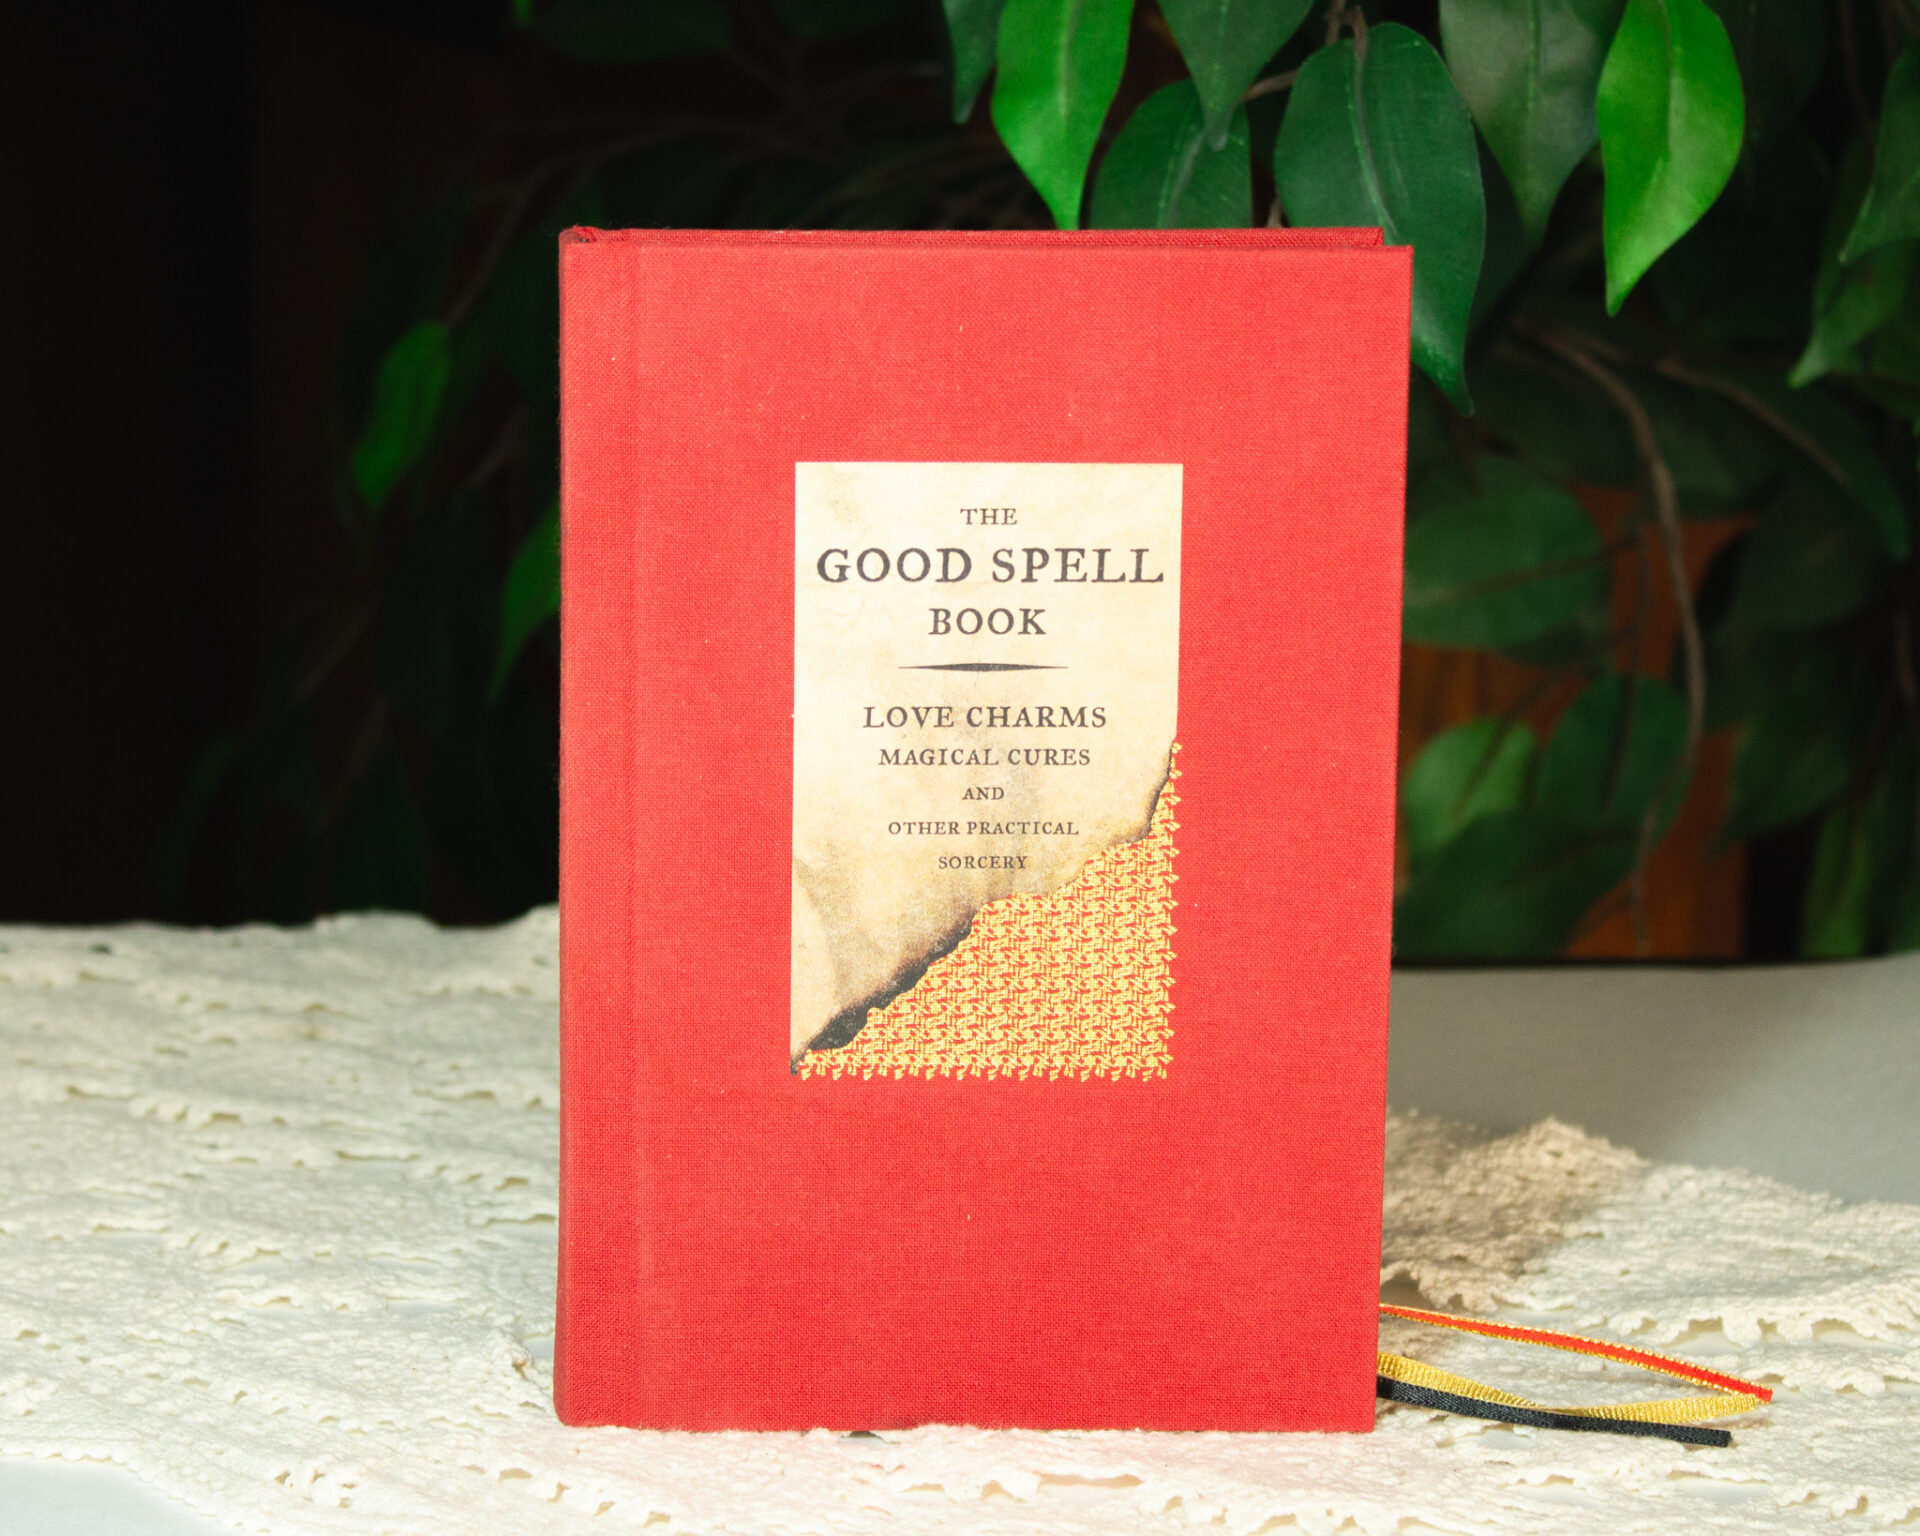 The Good Spell Book by Gillian Kemp, Hardcover